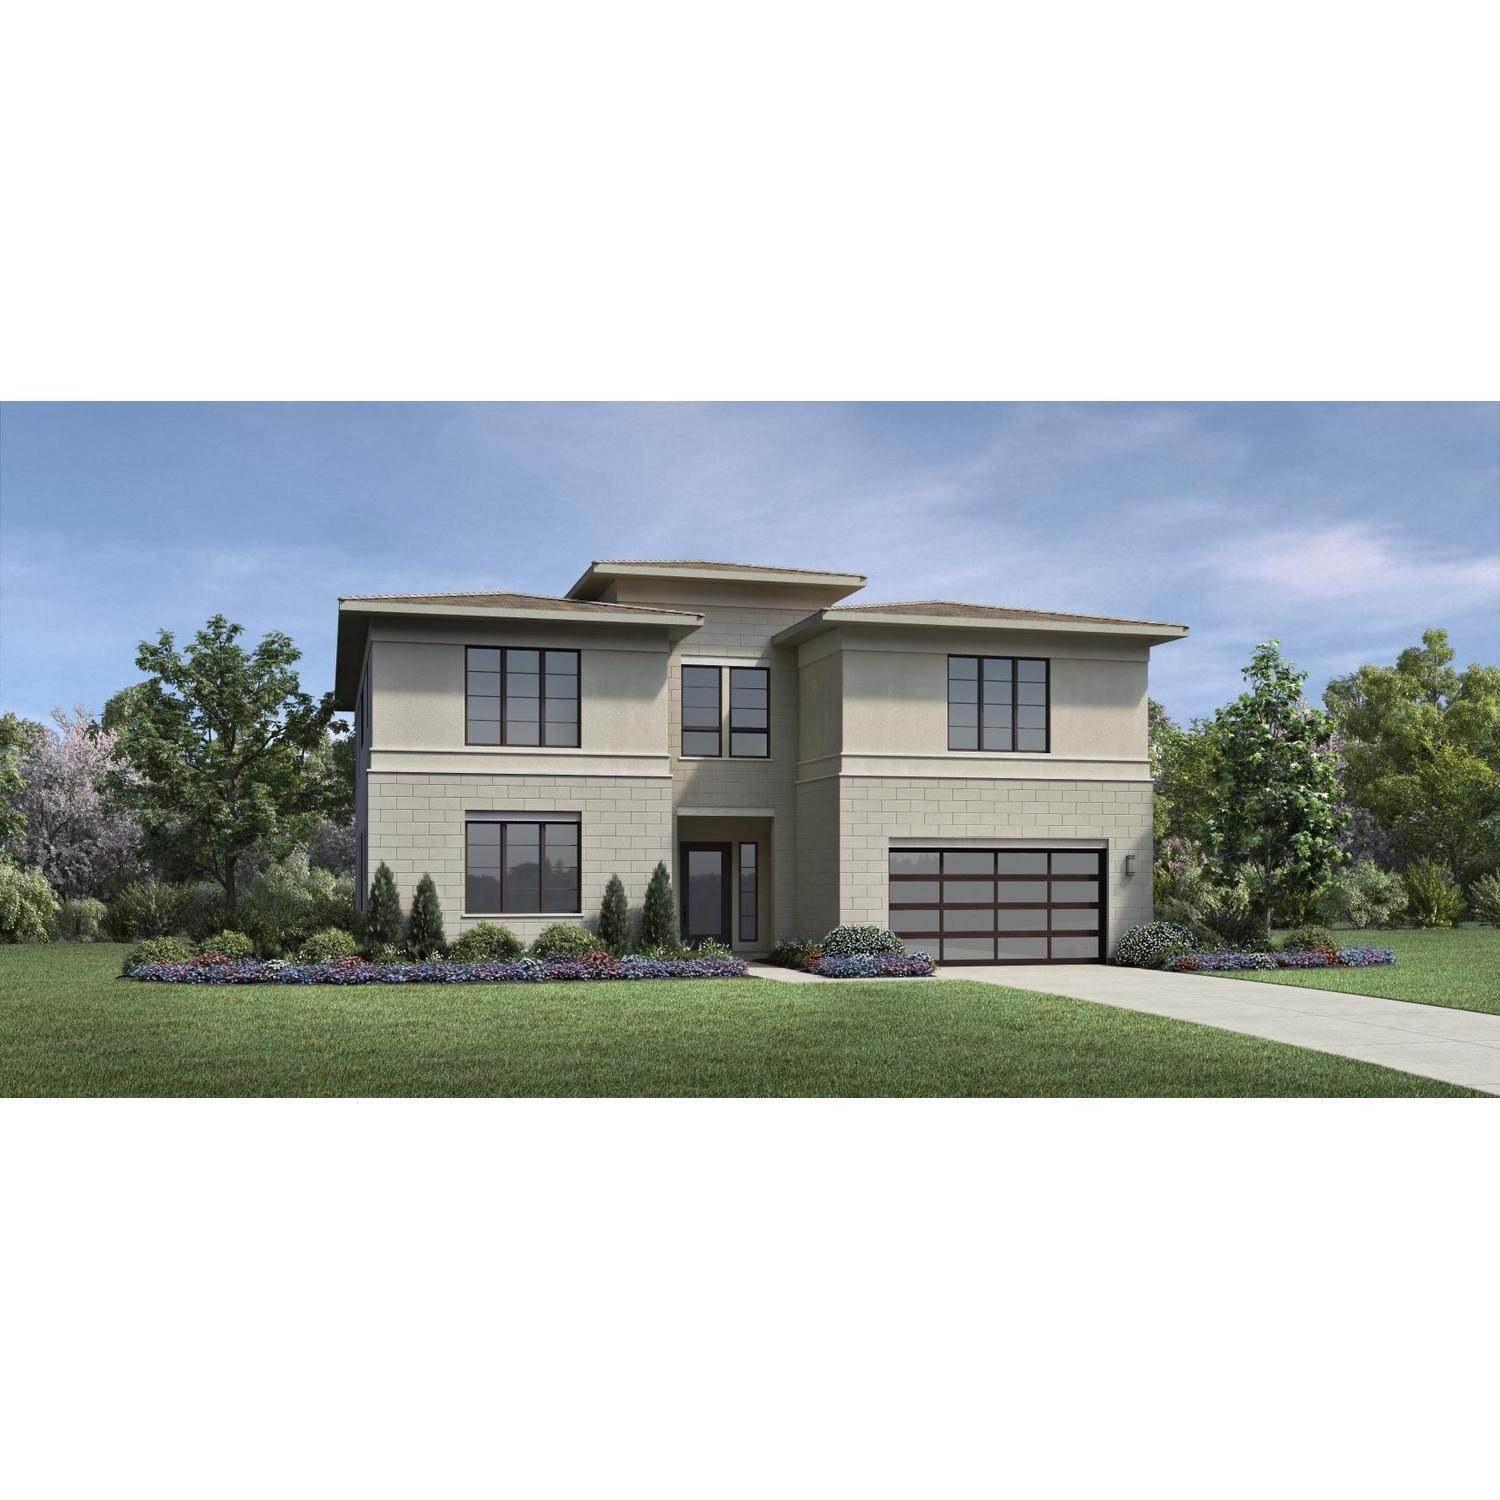 Single Family for Sale at Westcliffe At Porter Ranch - Summit Collection - Asti 20422 Marlow Ln PORTER RANCH, CALIFORNIA 91326 UNITED STATES